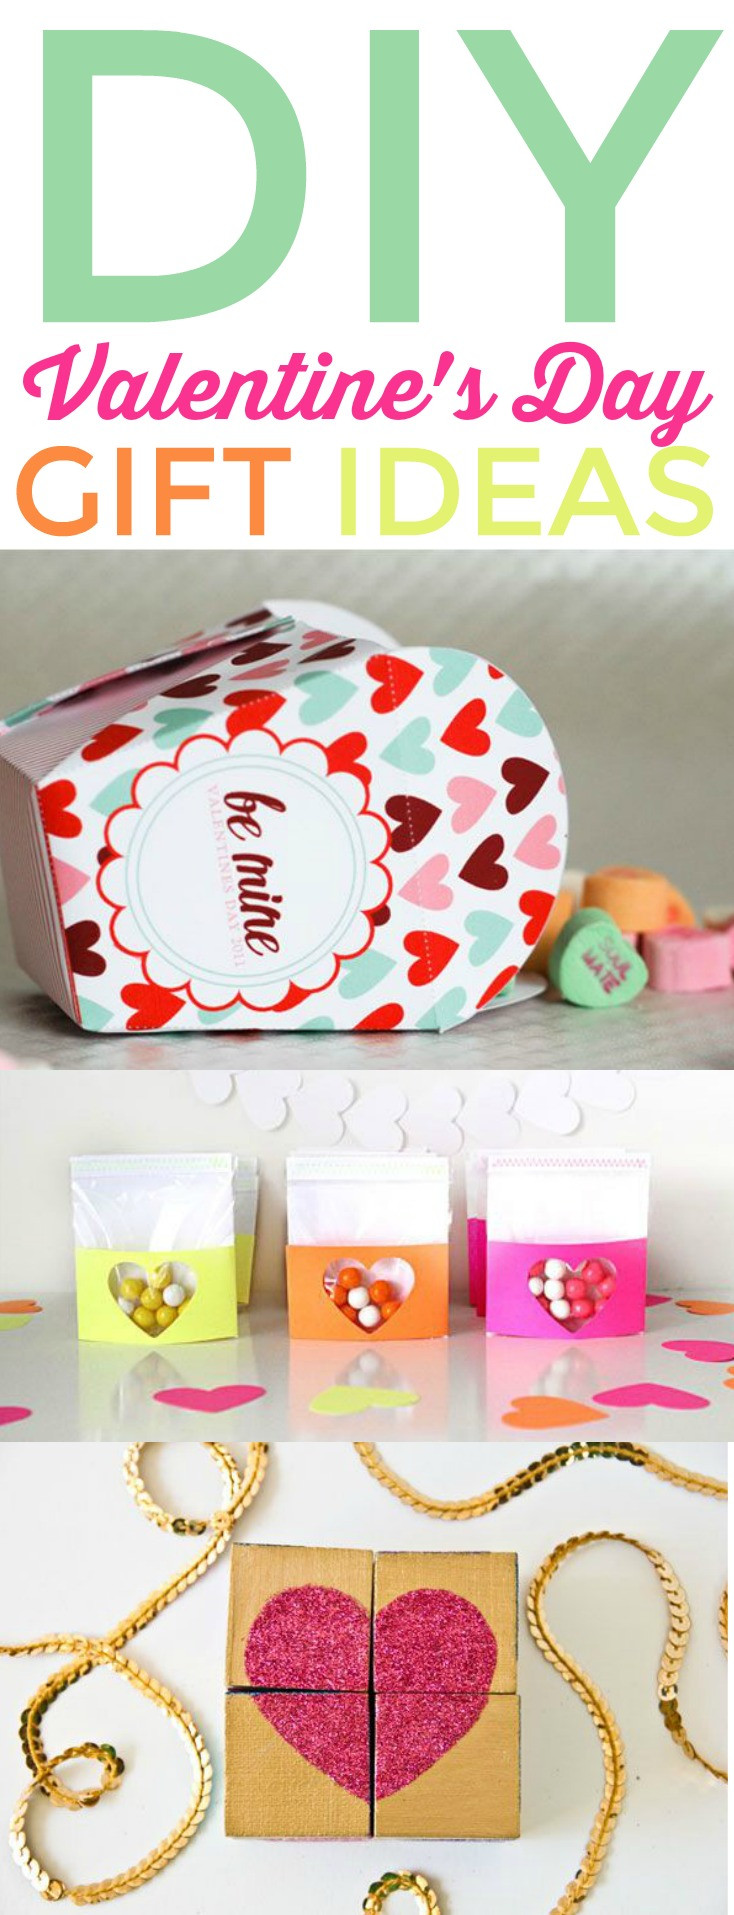 Valentine Day Gift Ideas
 DIY Valentines Day Gift Ideas A Little Craft In Your Day